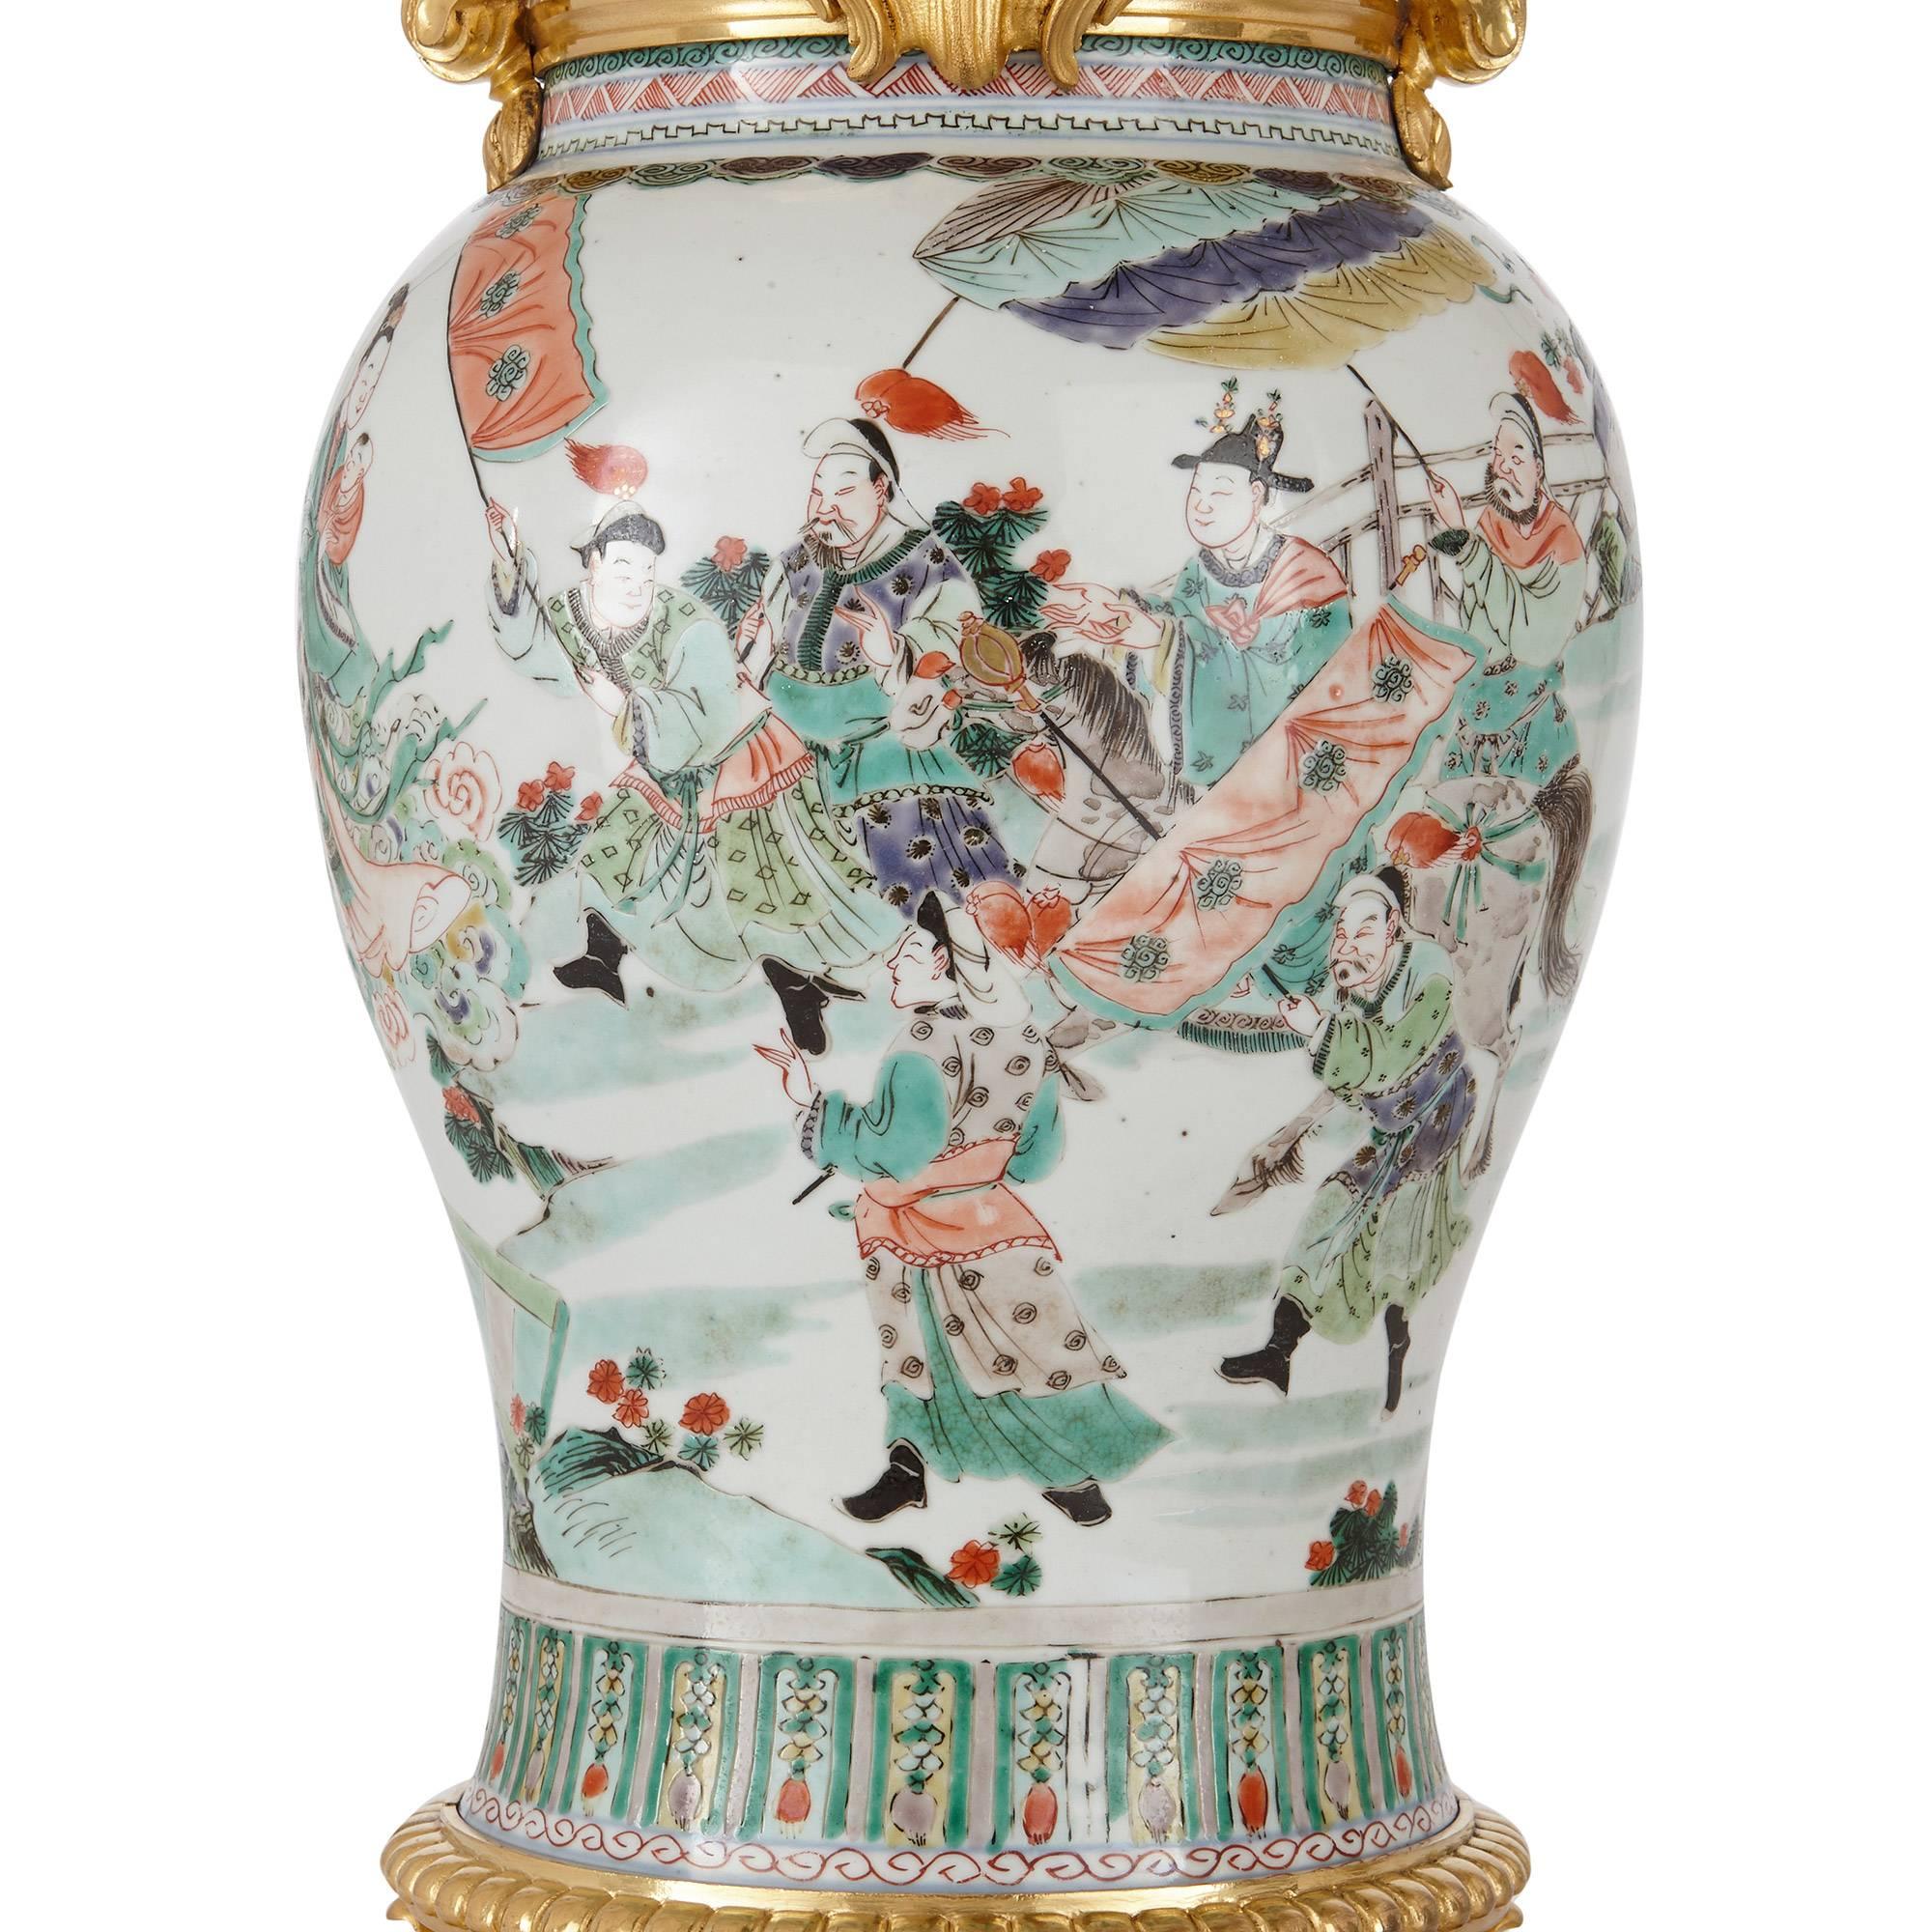 The ormolu French, late 19th century by Henri Vian (French, 1860-1905); the porcelain Chinese, early 18th century, Kangxi period.

Each of baluster form decorated with a procession of a figure on horseback with attendants in gardens and an